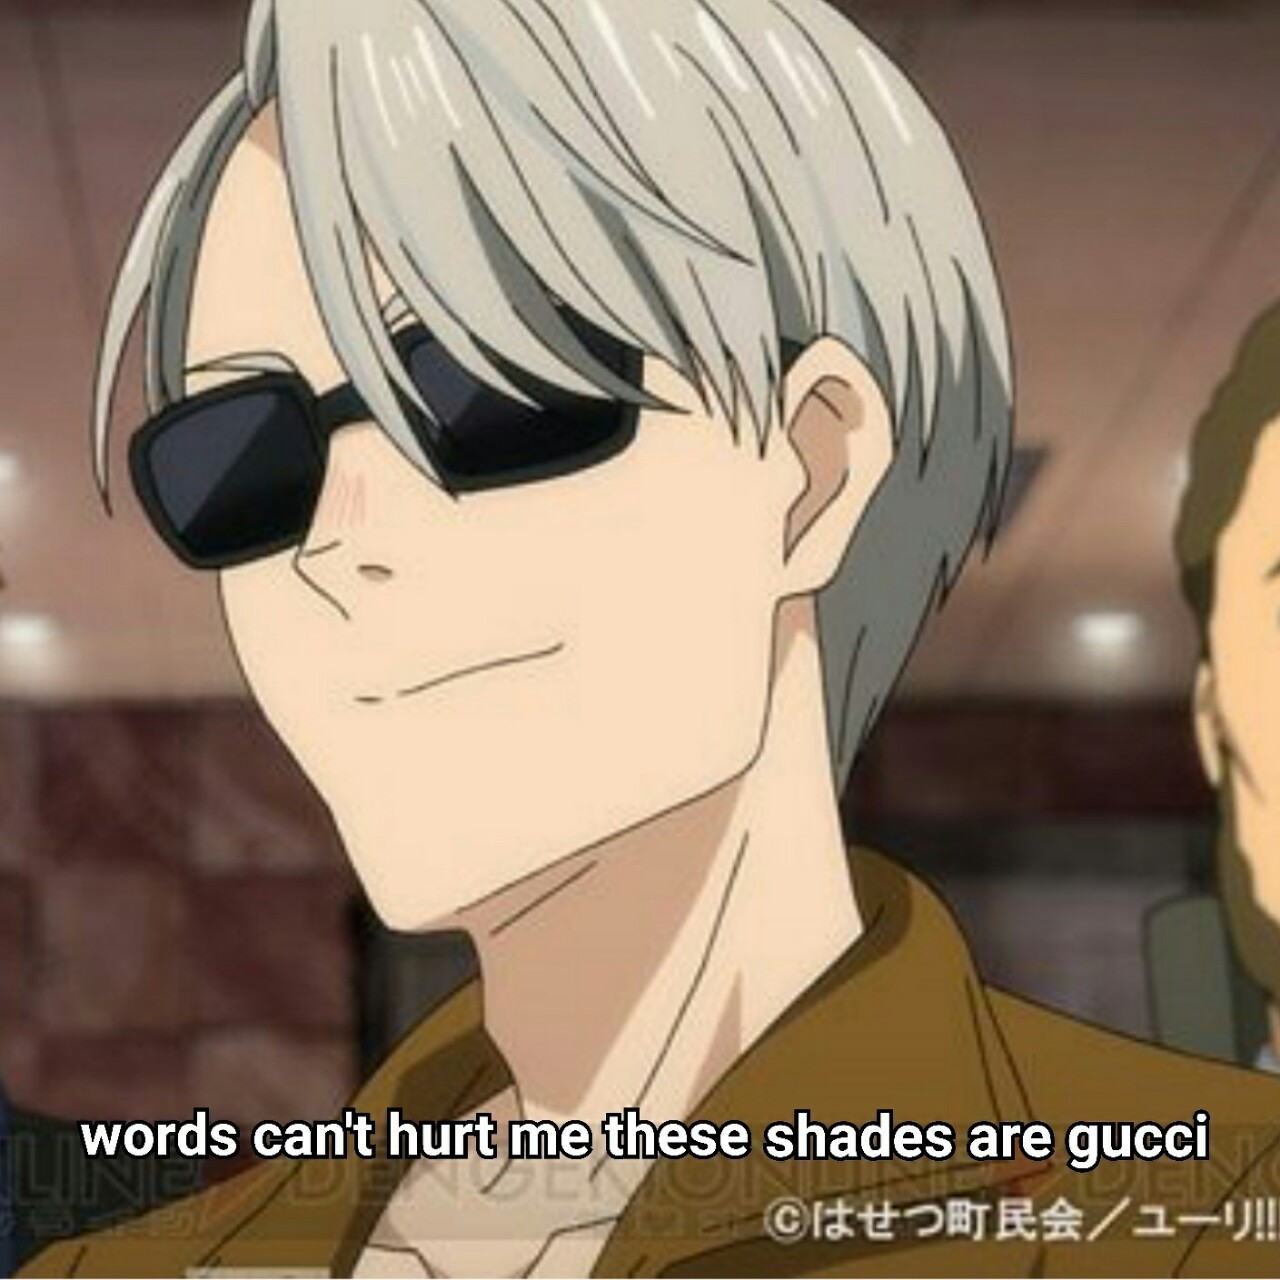 What The Kawoshin Actual Line From Yuri On Ice Episode 8